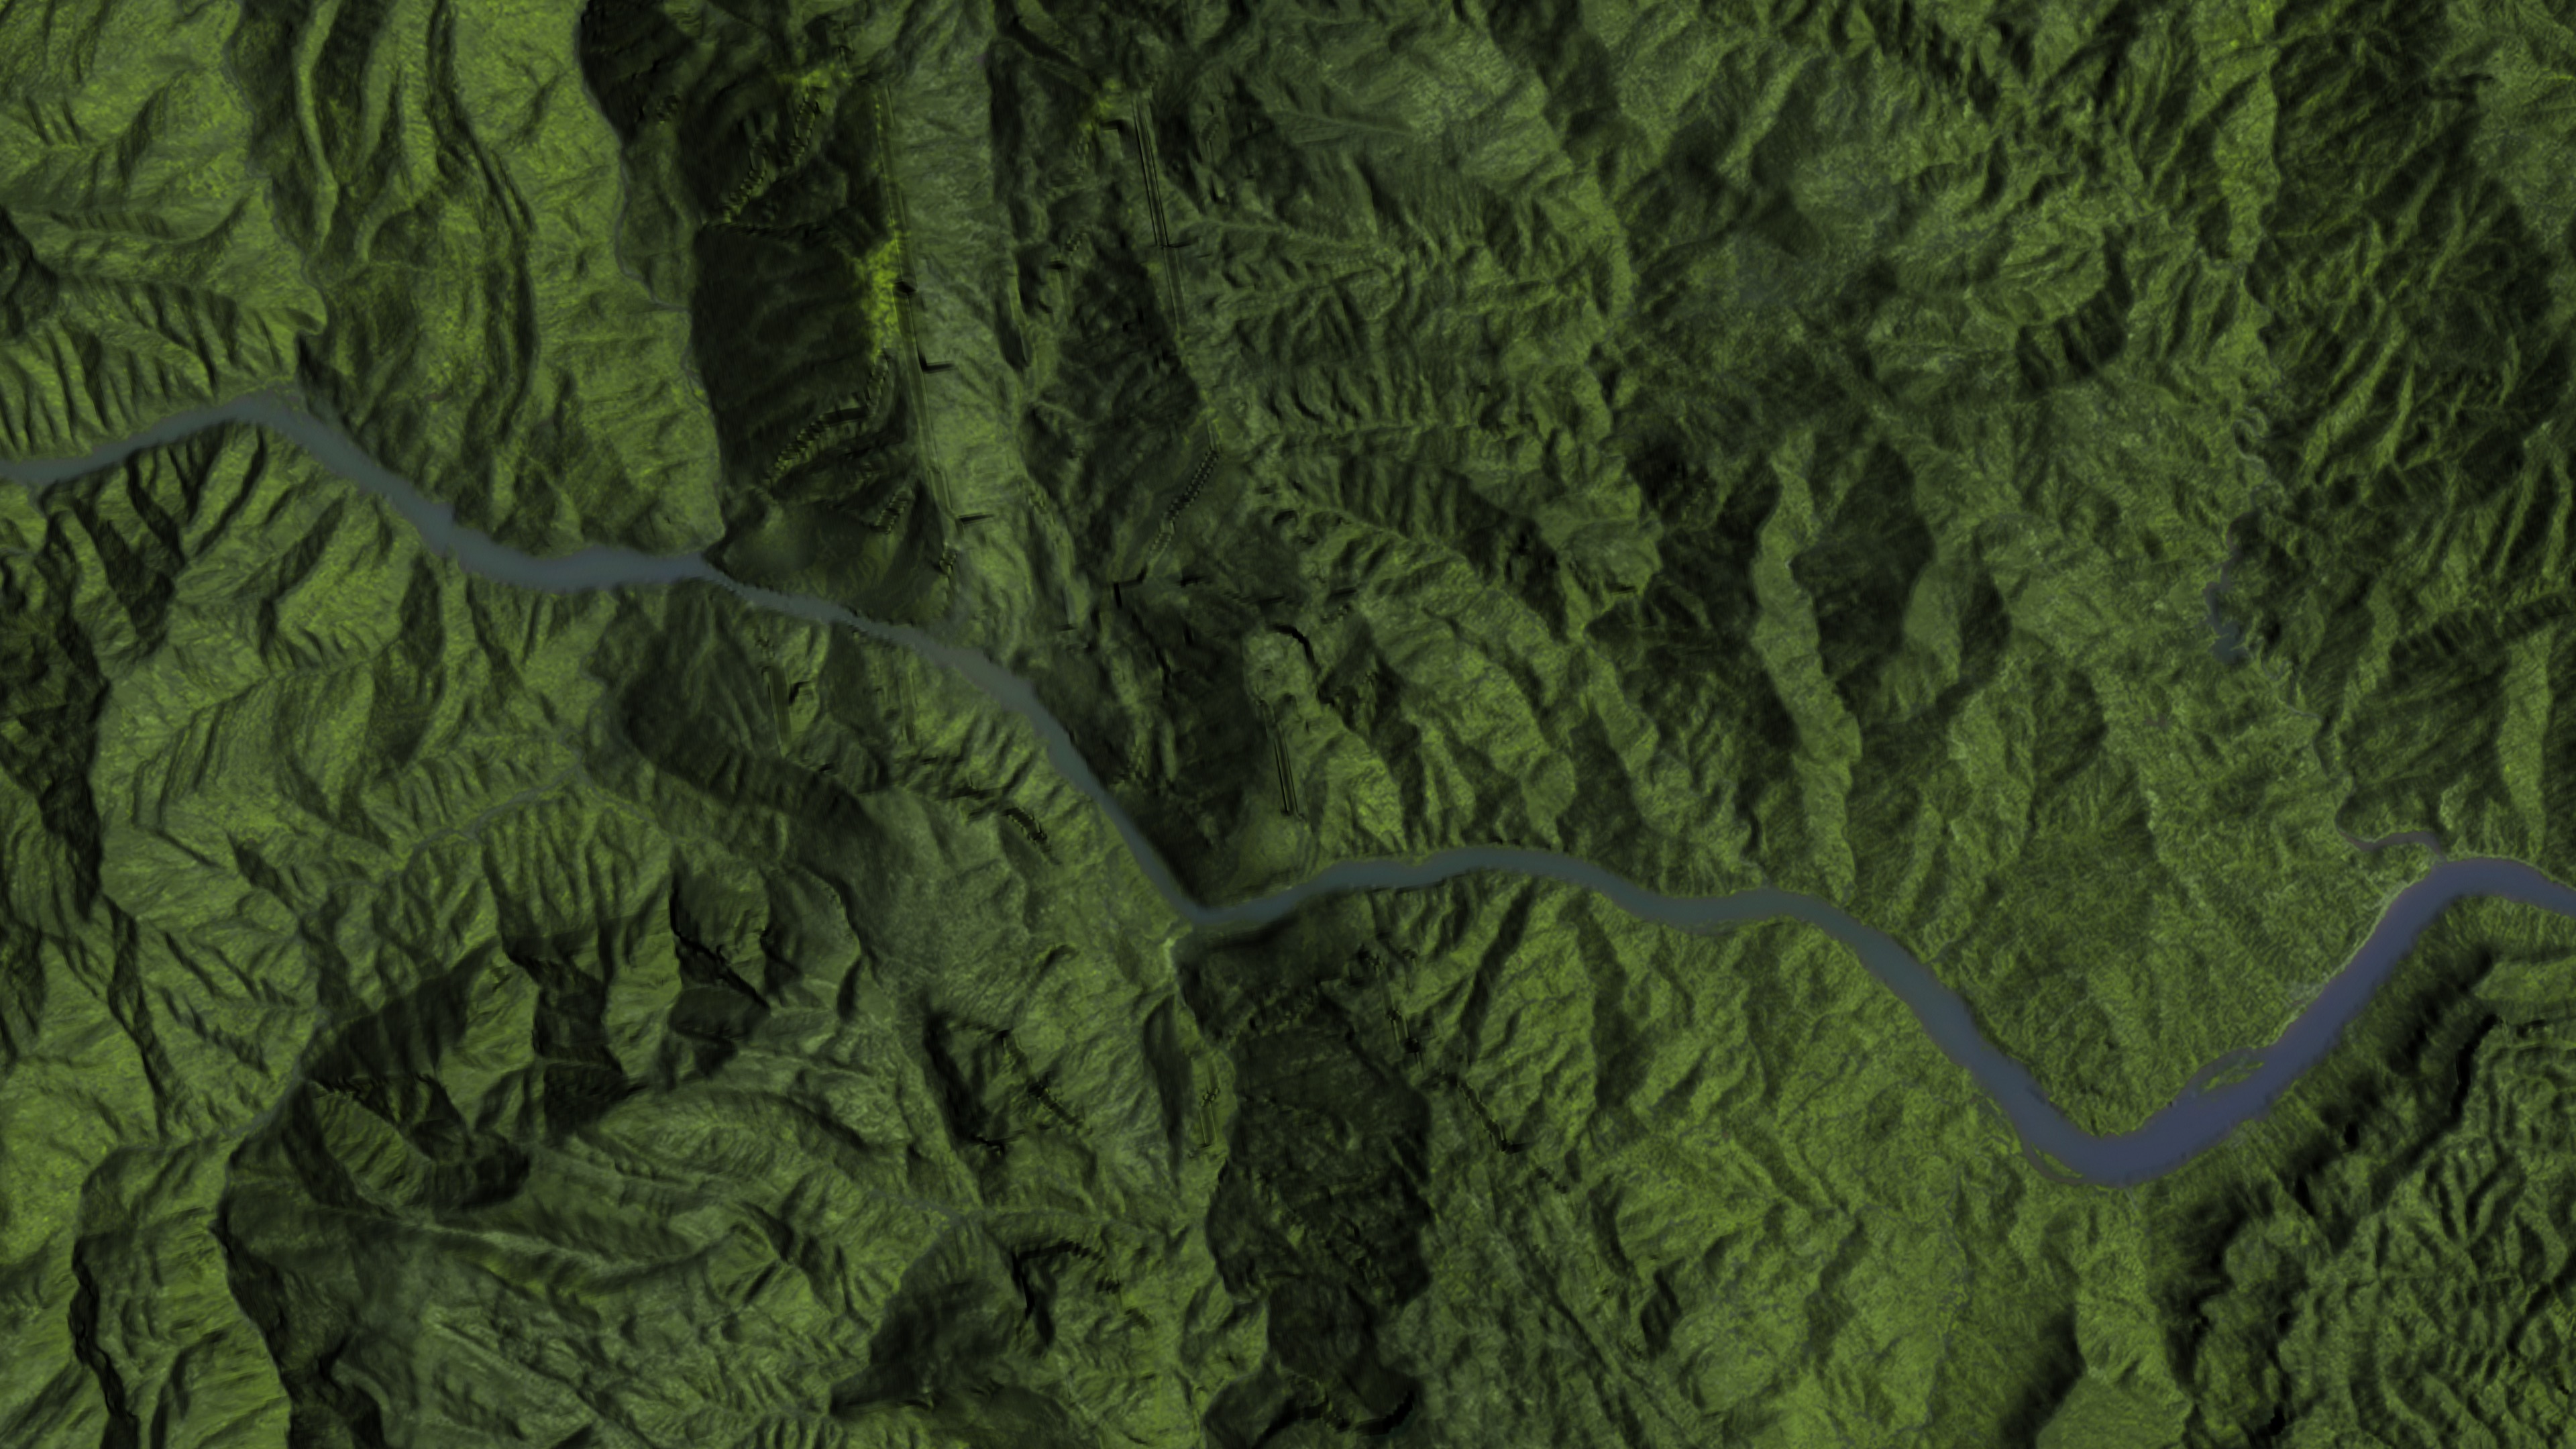 A 1987 bird's eye view of the Three Gorges Dam region as seen with Landsat-5.